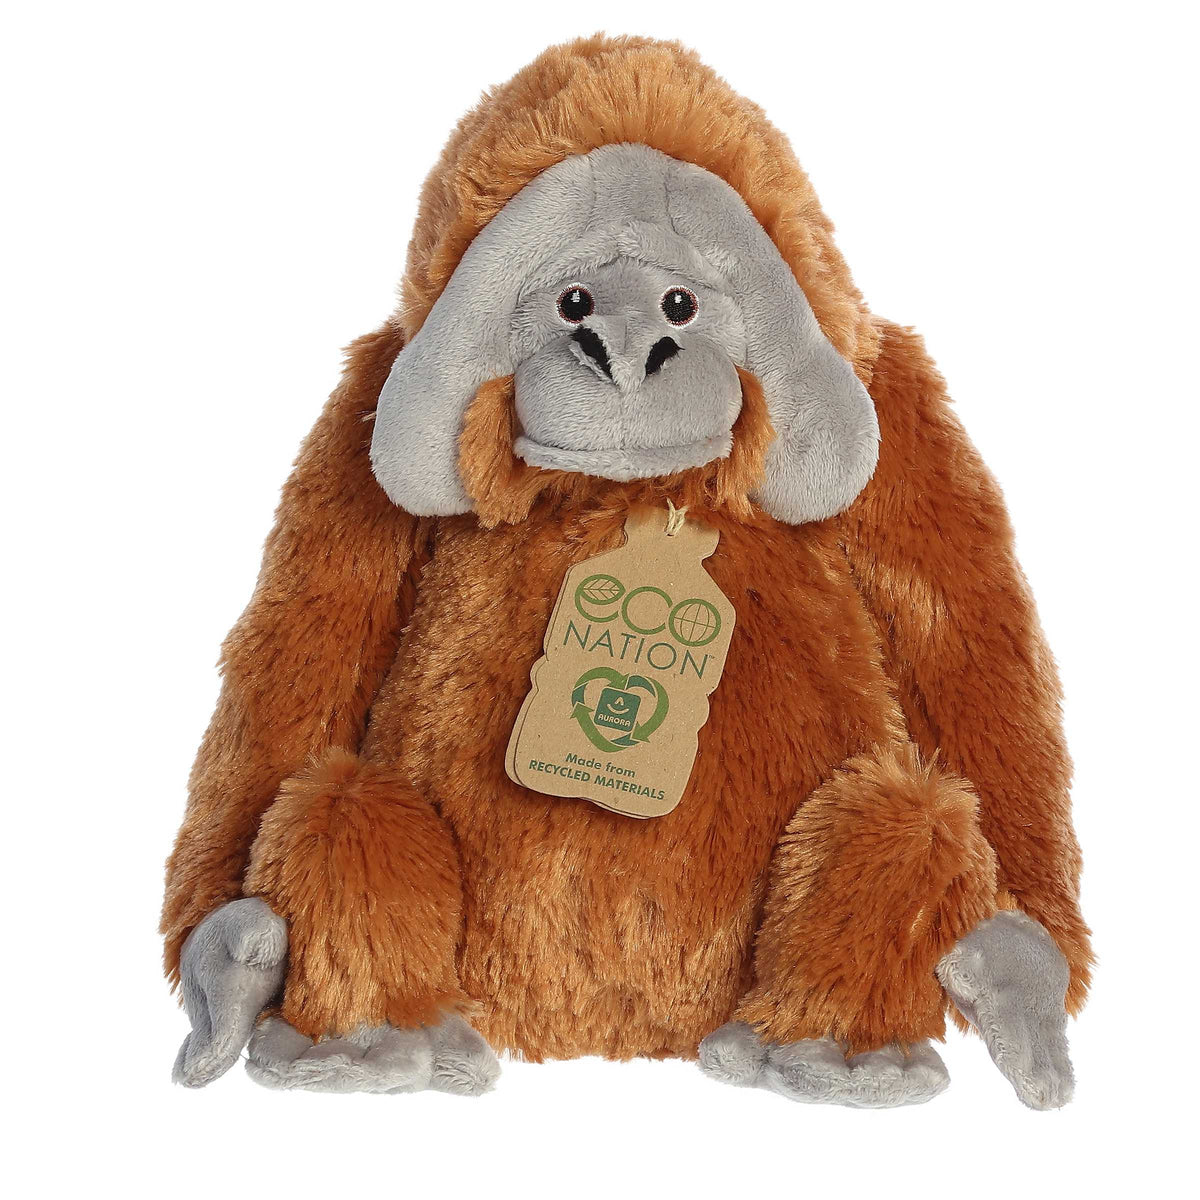 Eco Hugs Orangutan by Aurora, with rich amber fur, a gentle gaze, and a hang tag for its eco-friendly, recycled origins.